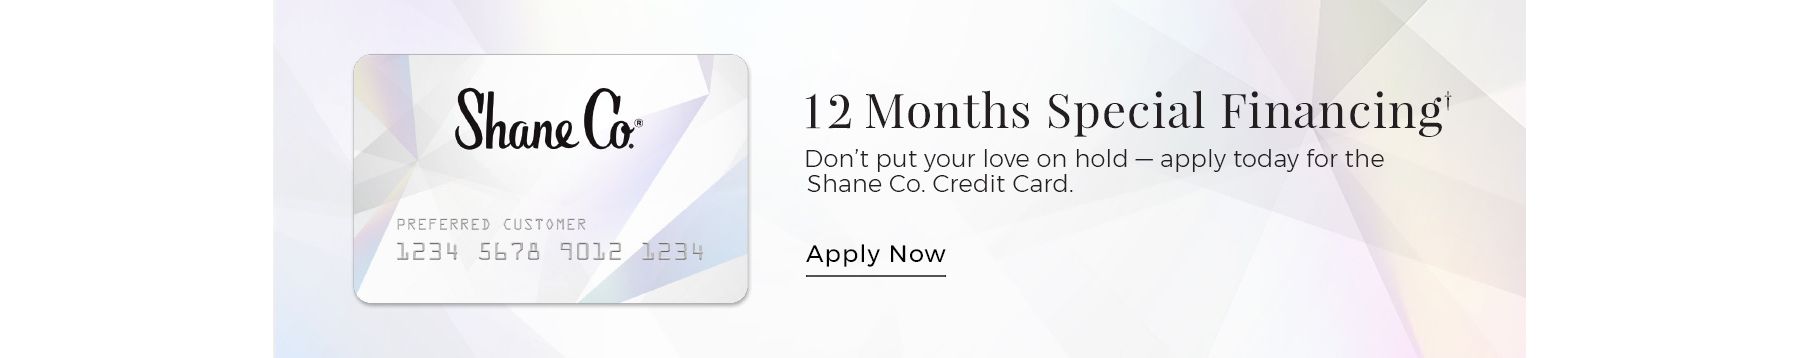 Special 12 Month Financing with the Shane Co Credit Card